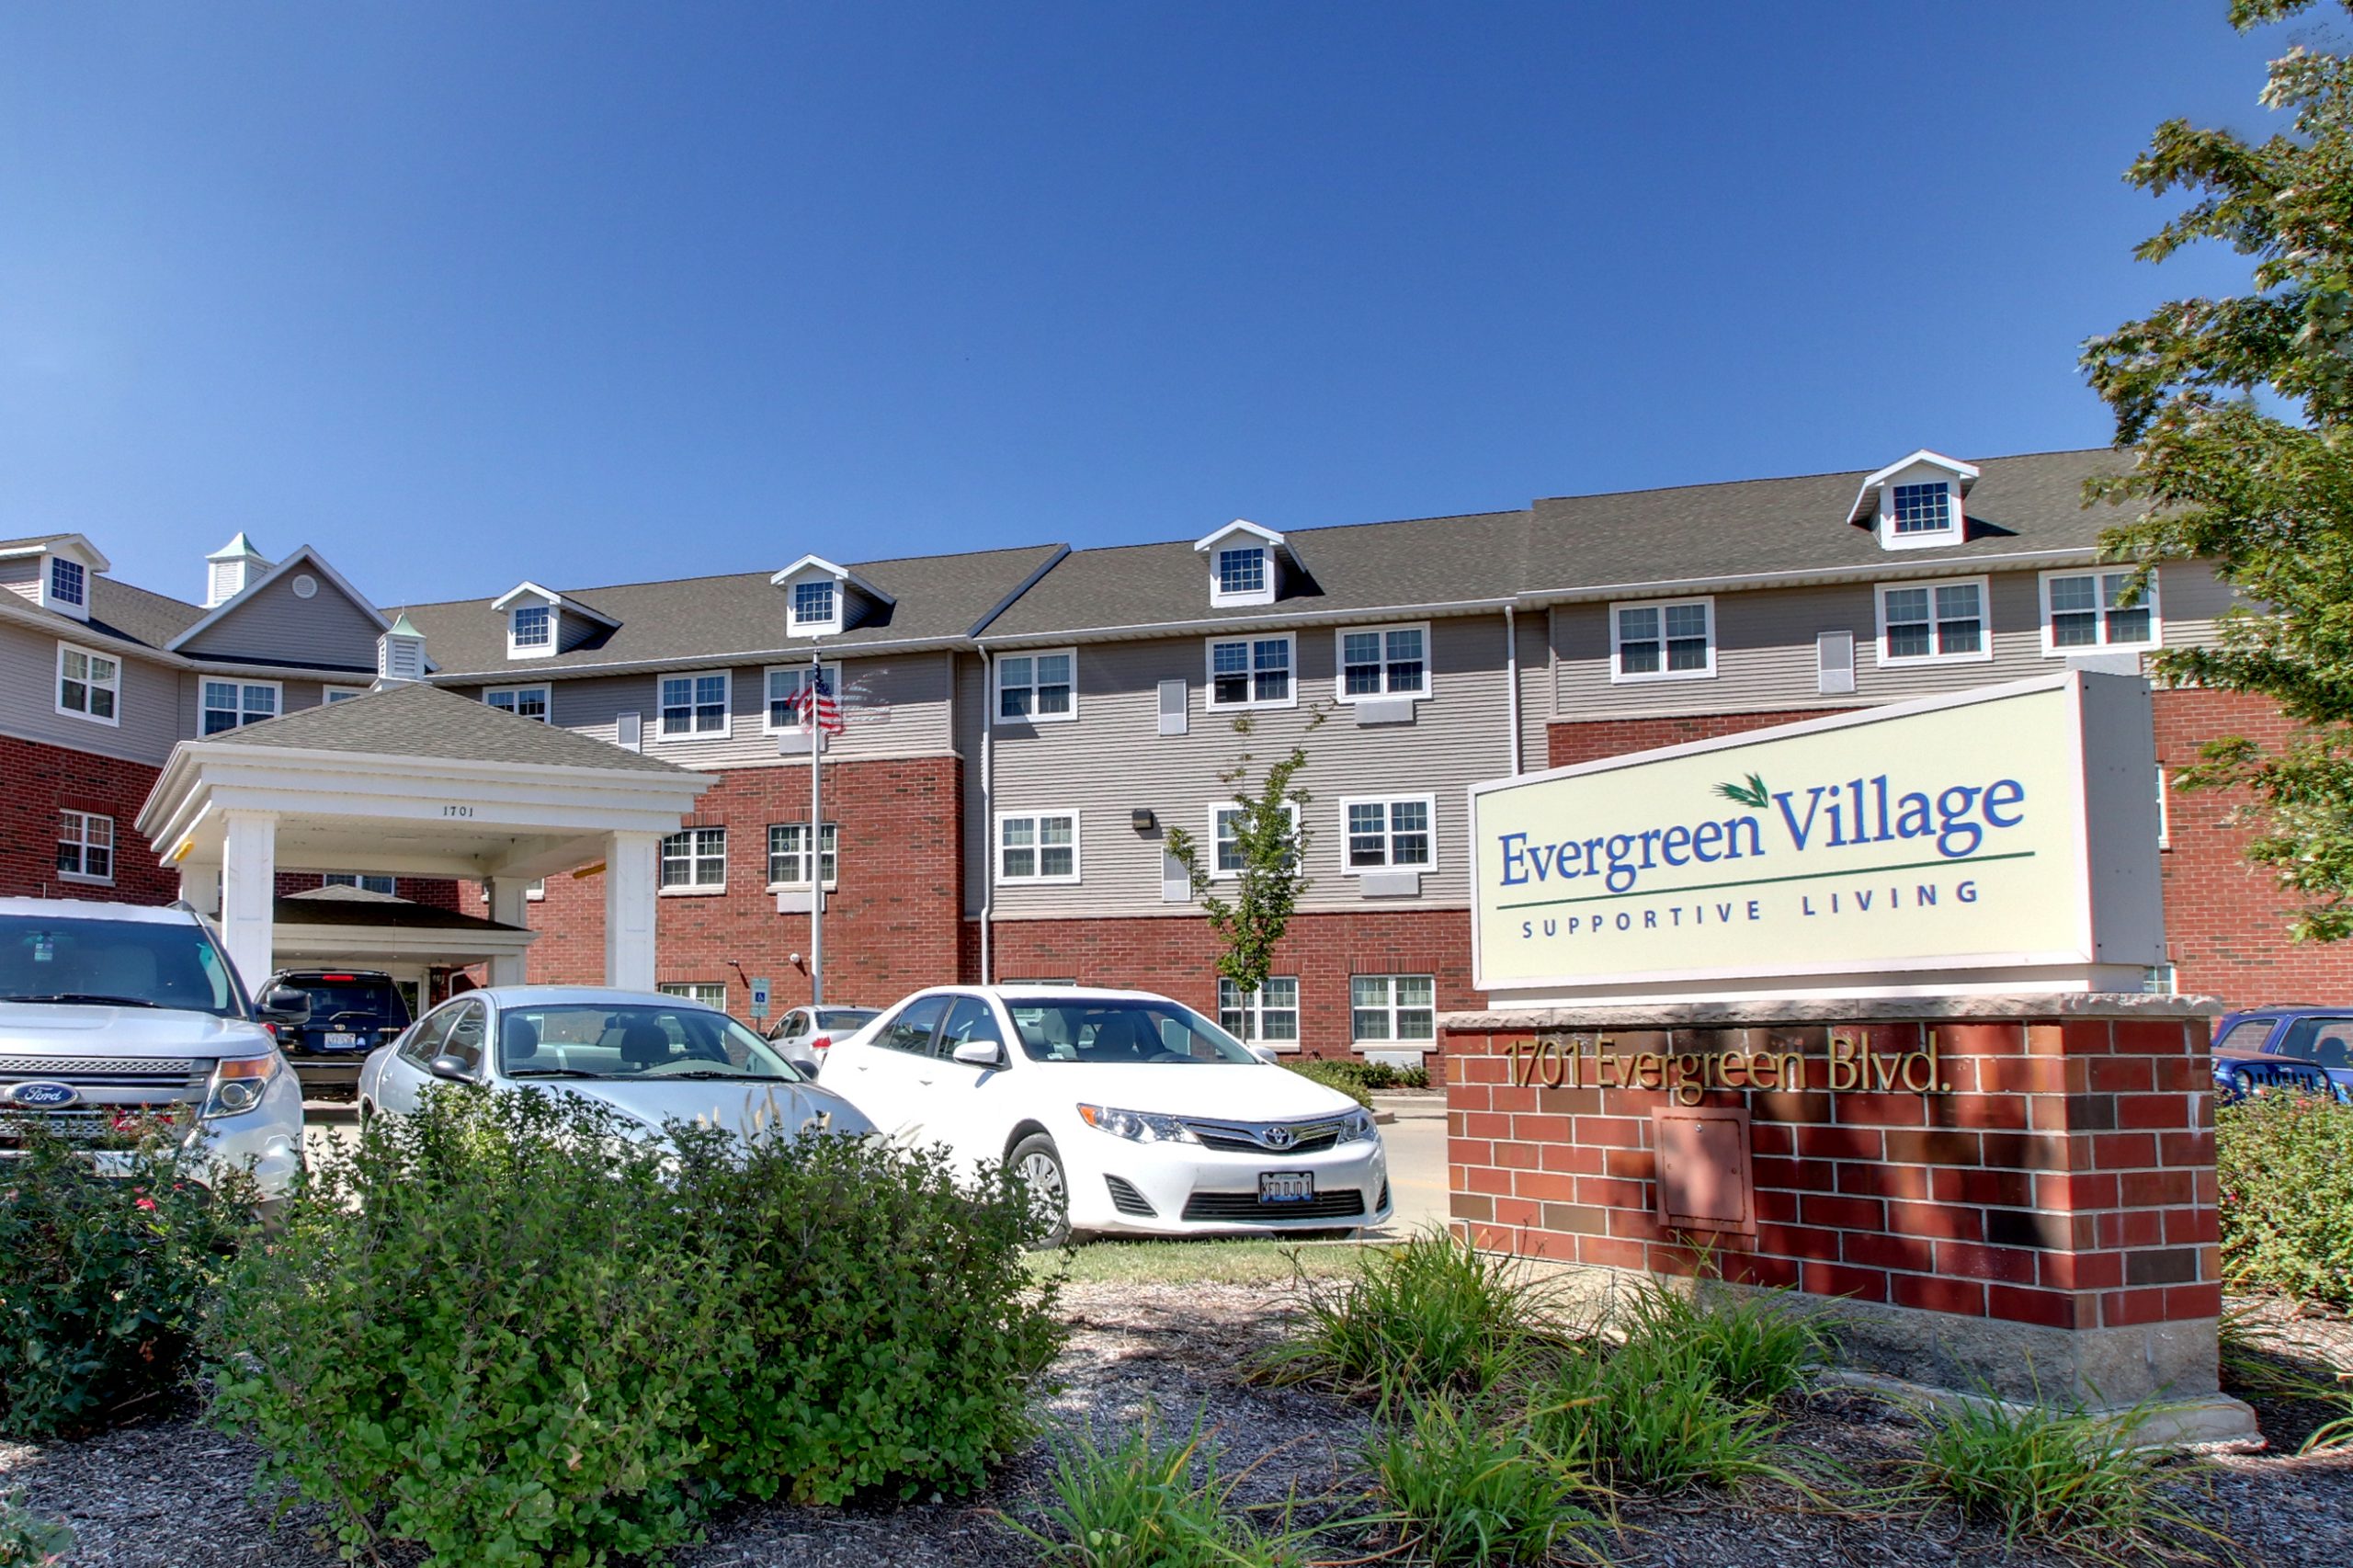 Evergreen Village Supportive Living